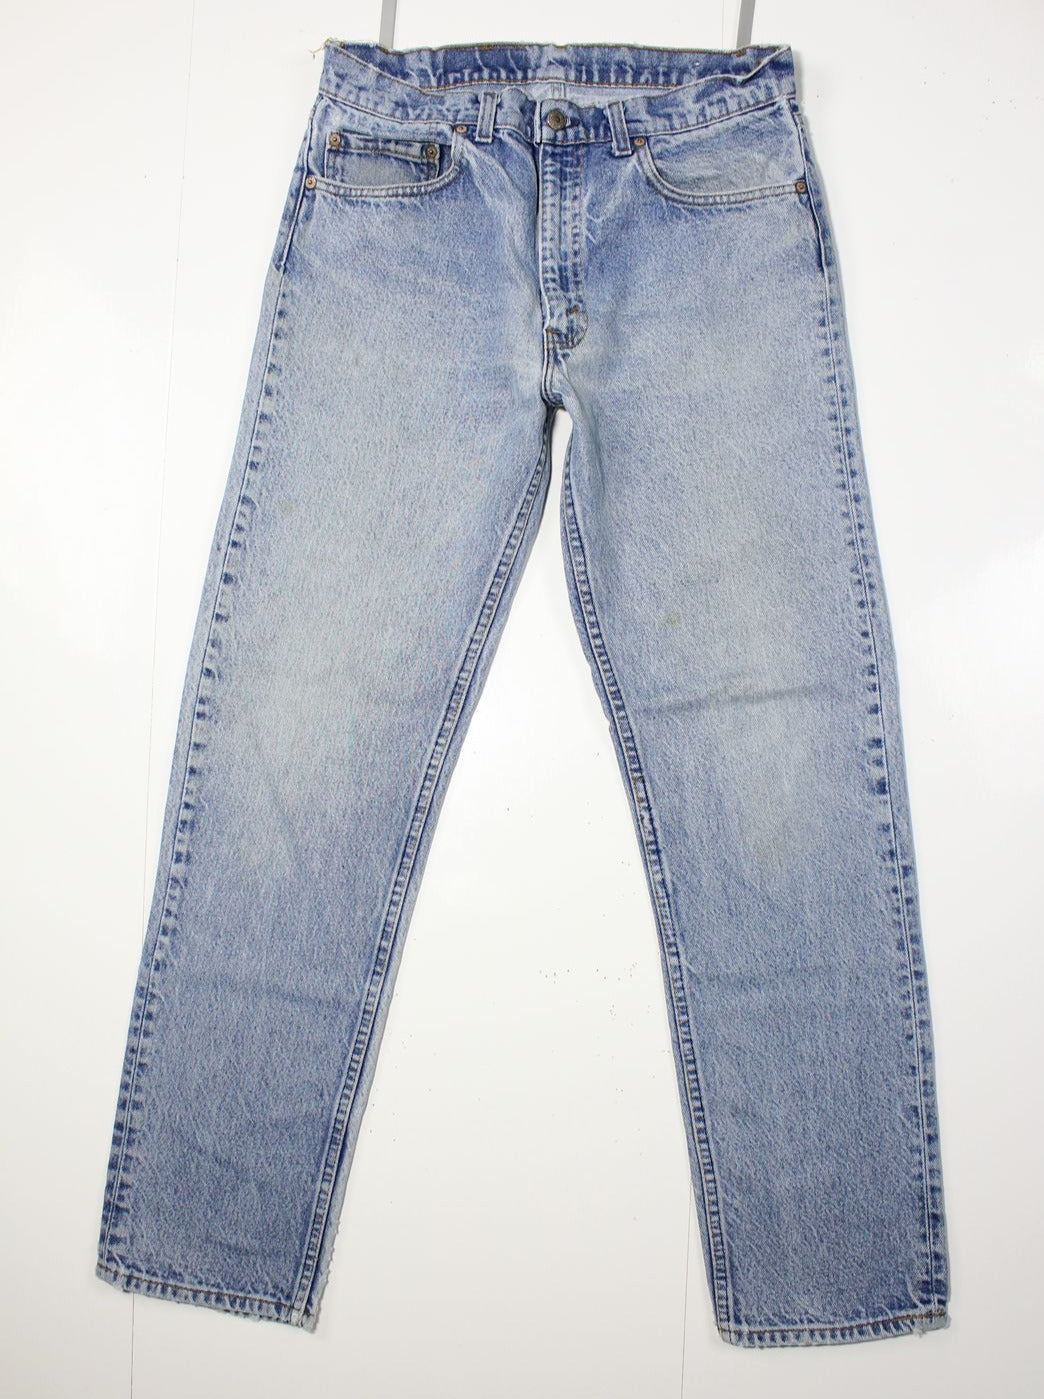 Levi's 505 Made In USA W34 L32 Jeans Vintage